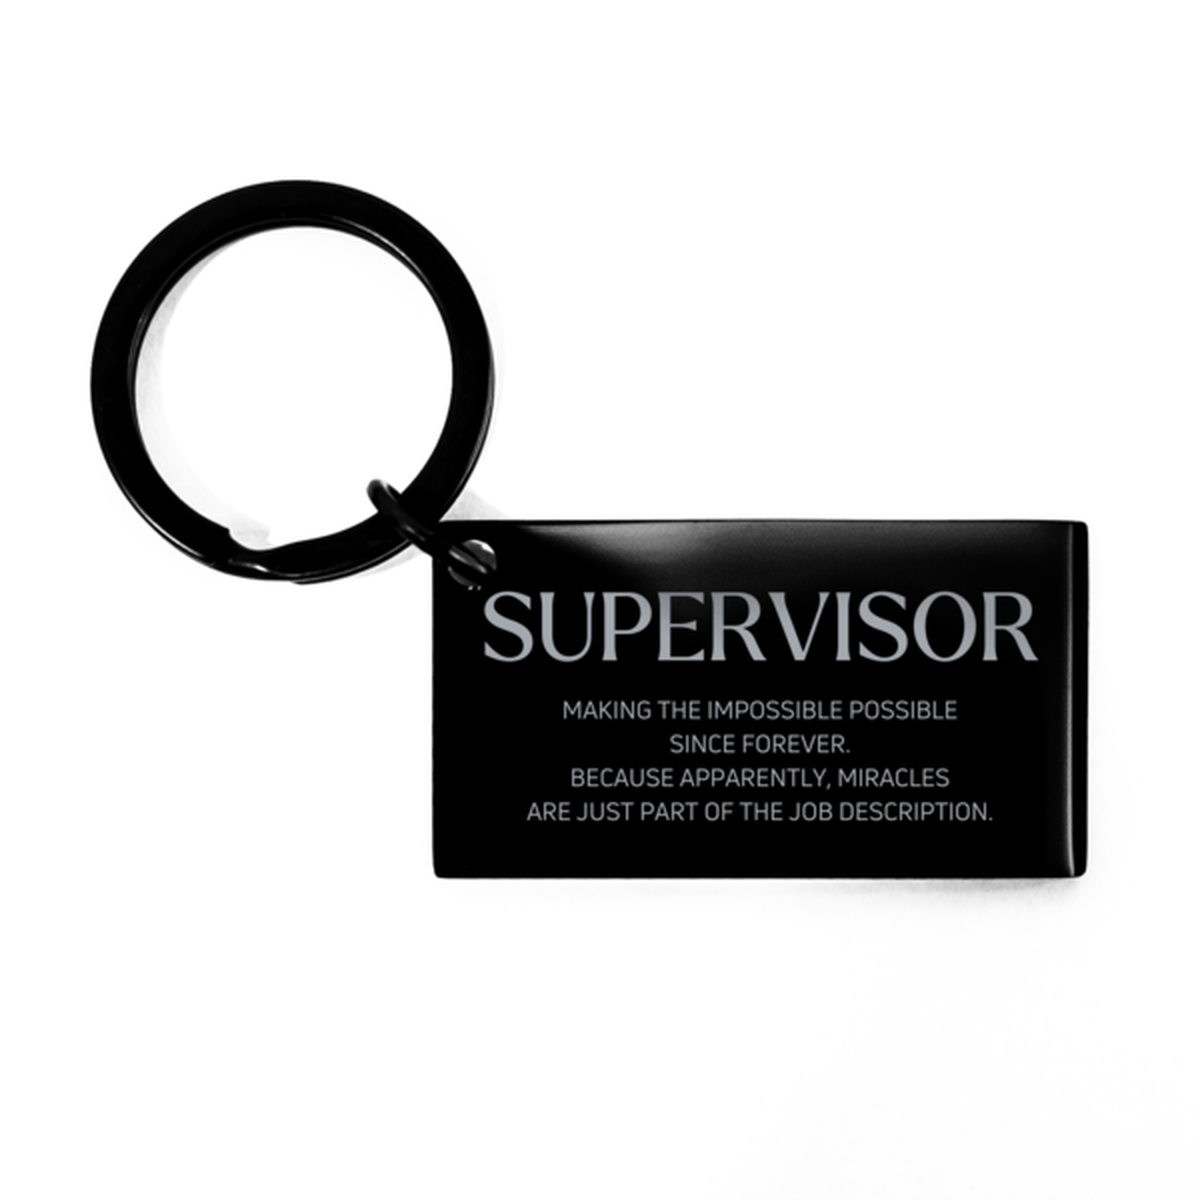 Funny Supervisor Gifts, Miracles are just part of the job description, Inspirational Birthday Keychain For Supervisor, Men, Women, Coworkers, Friends, Boss